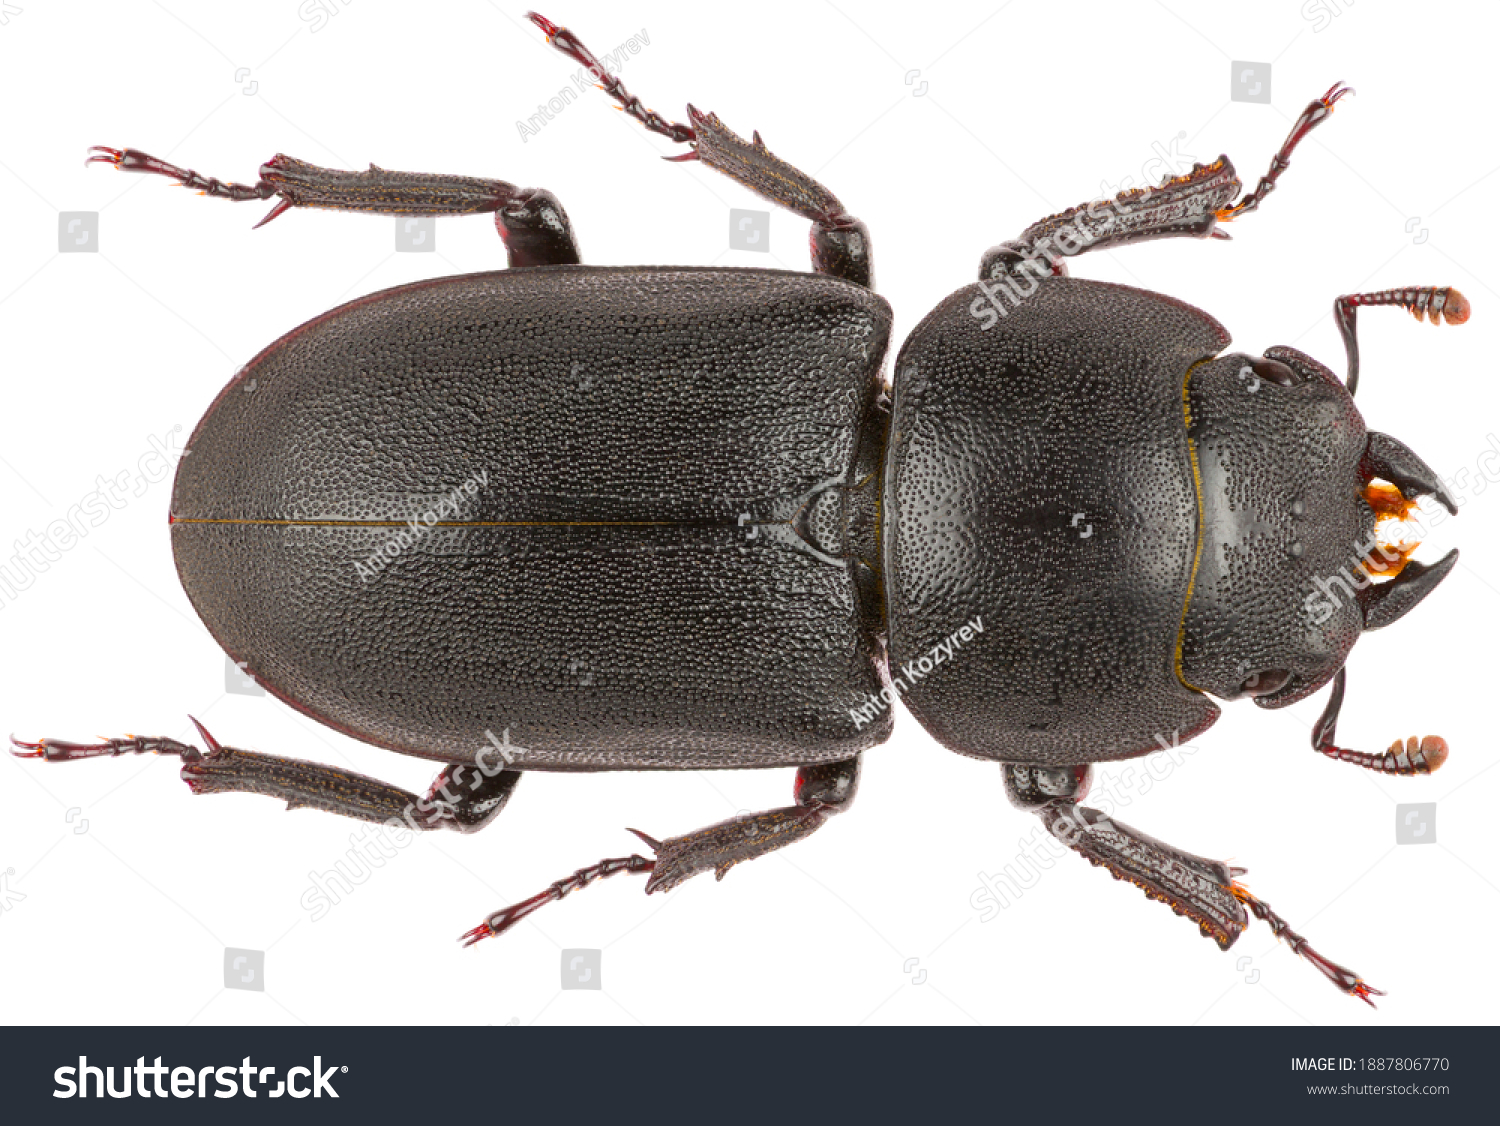 Dorcus parallelipipedus, the lesser stag beetle, is a species of stag beetle from the family Lucanidae. Dorsal view of lesser stag beetle isolated on white background. #1887806770